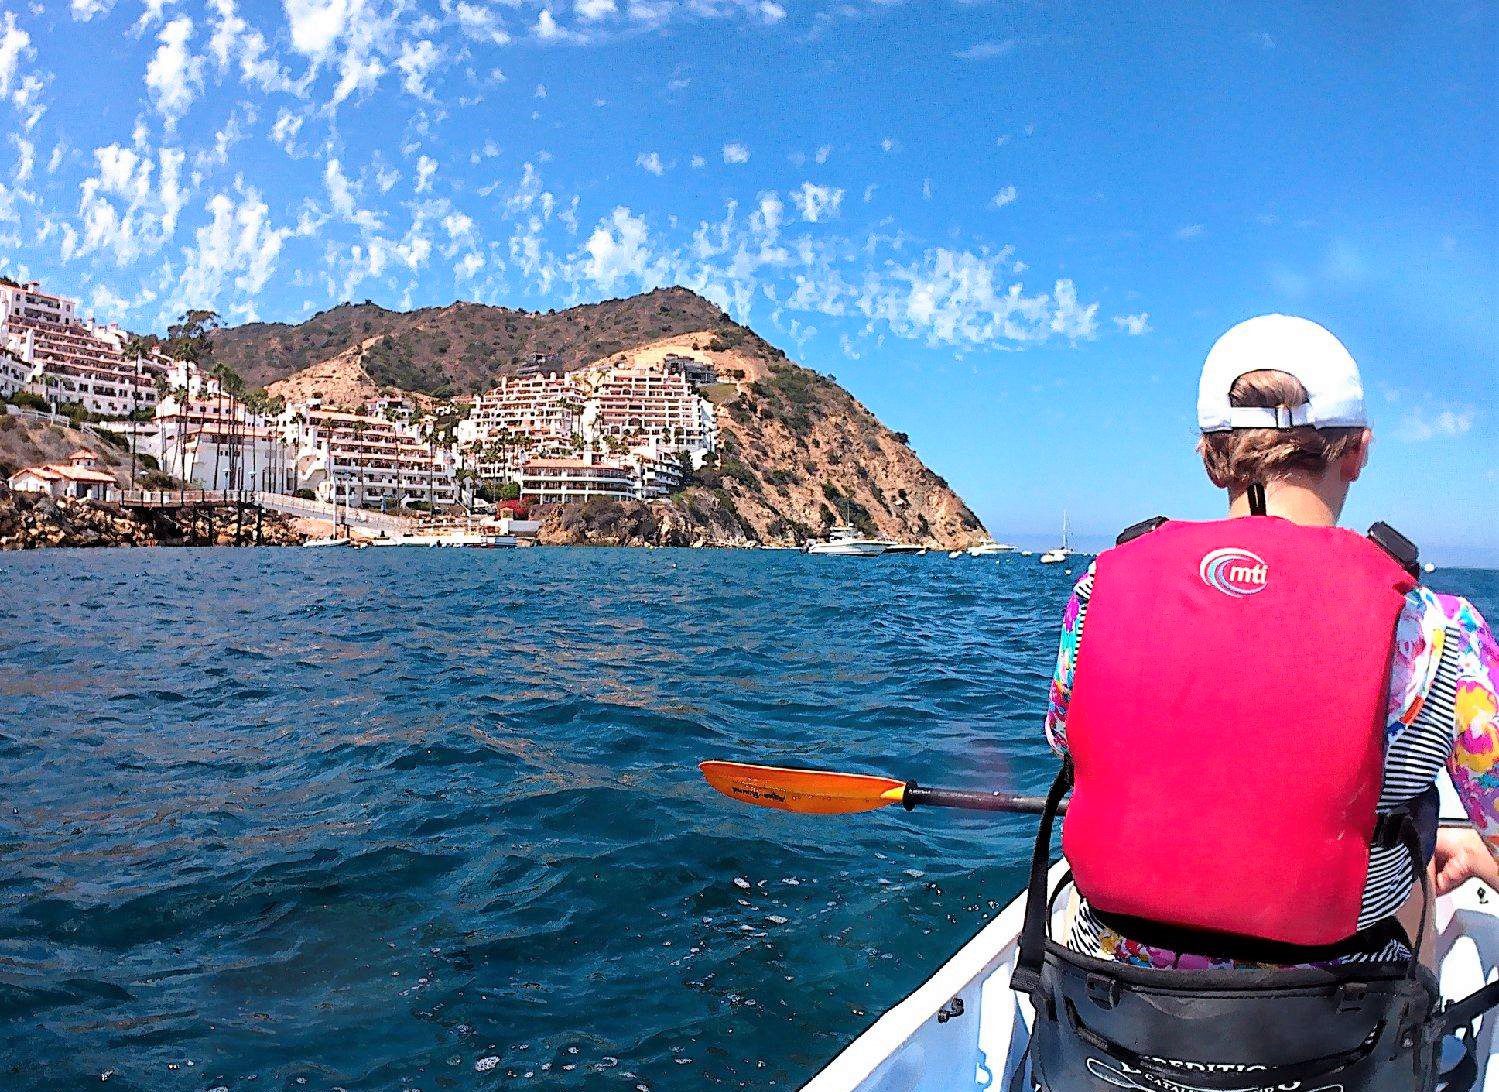 6 awesome things to do on Catalina Island | A Day Trip on Catalina Island #catalinaisland #california #simplywander